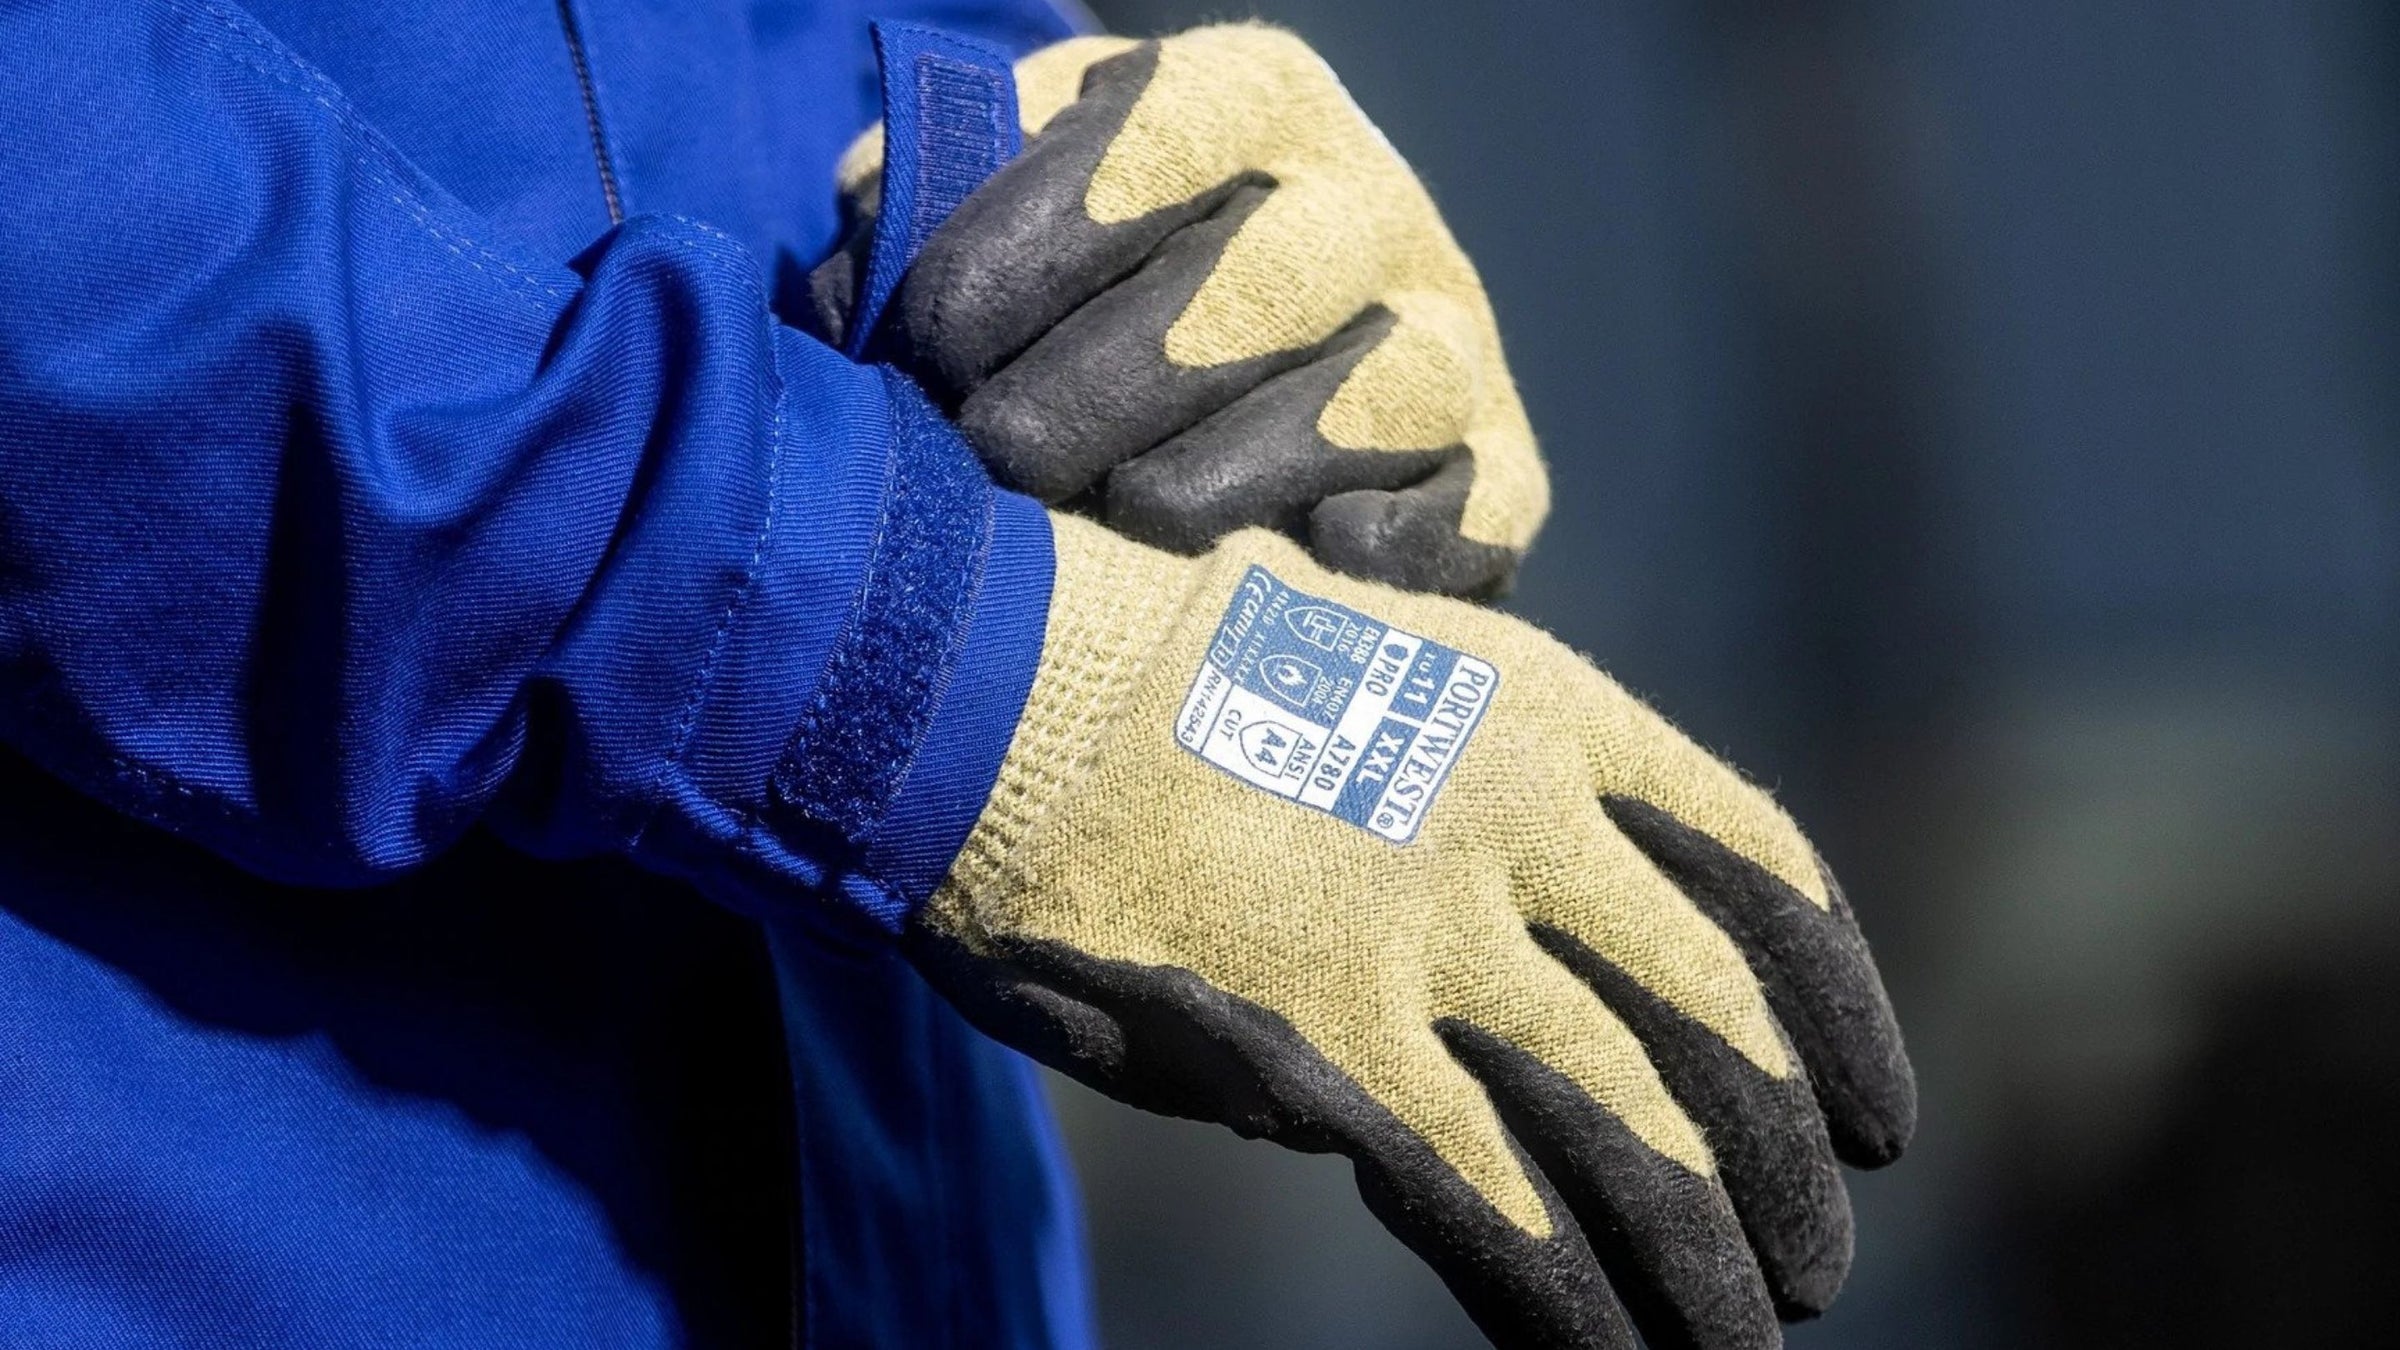 An close-up image of Portwest Work gloves